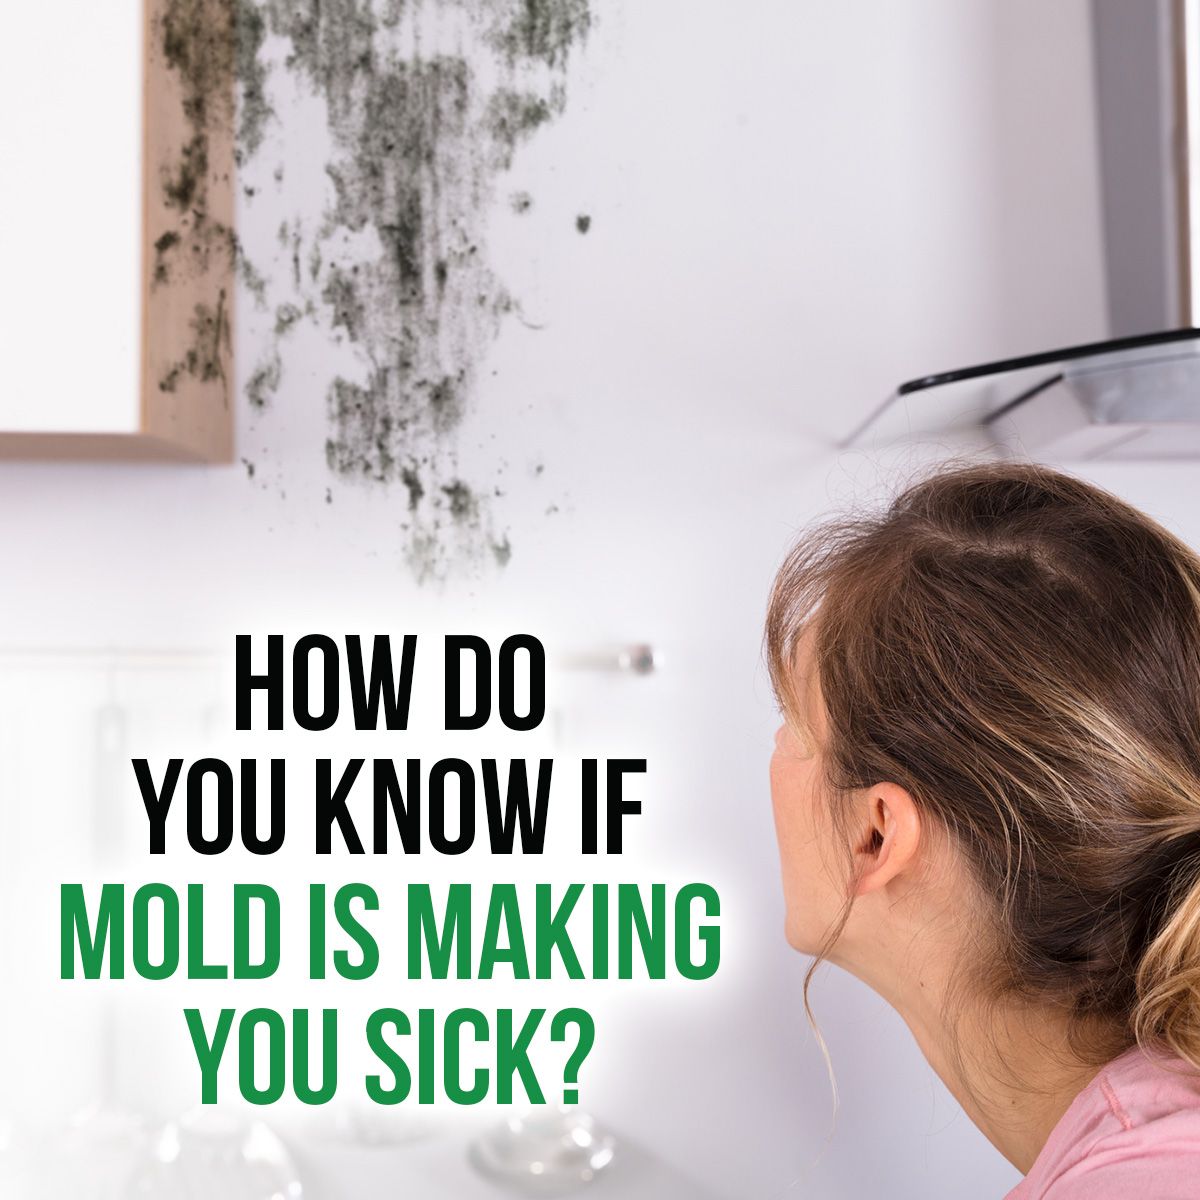 How Do You Know if Mold Is Making You Sick?